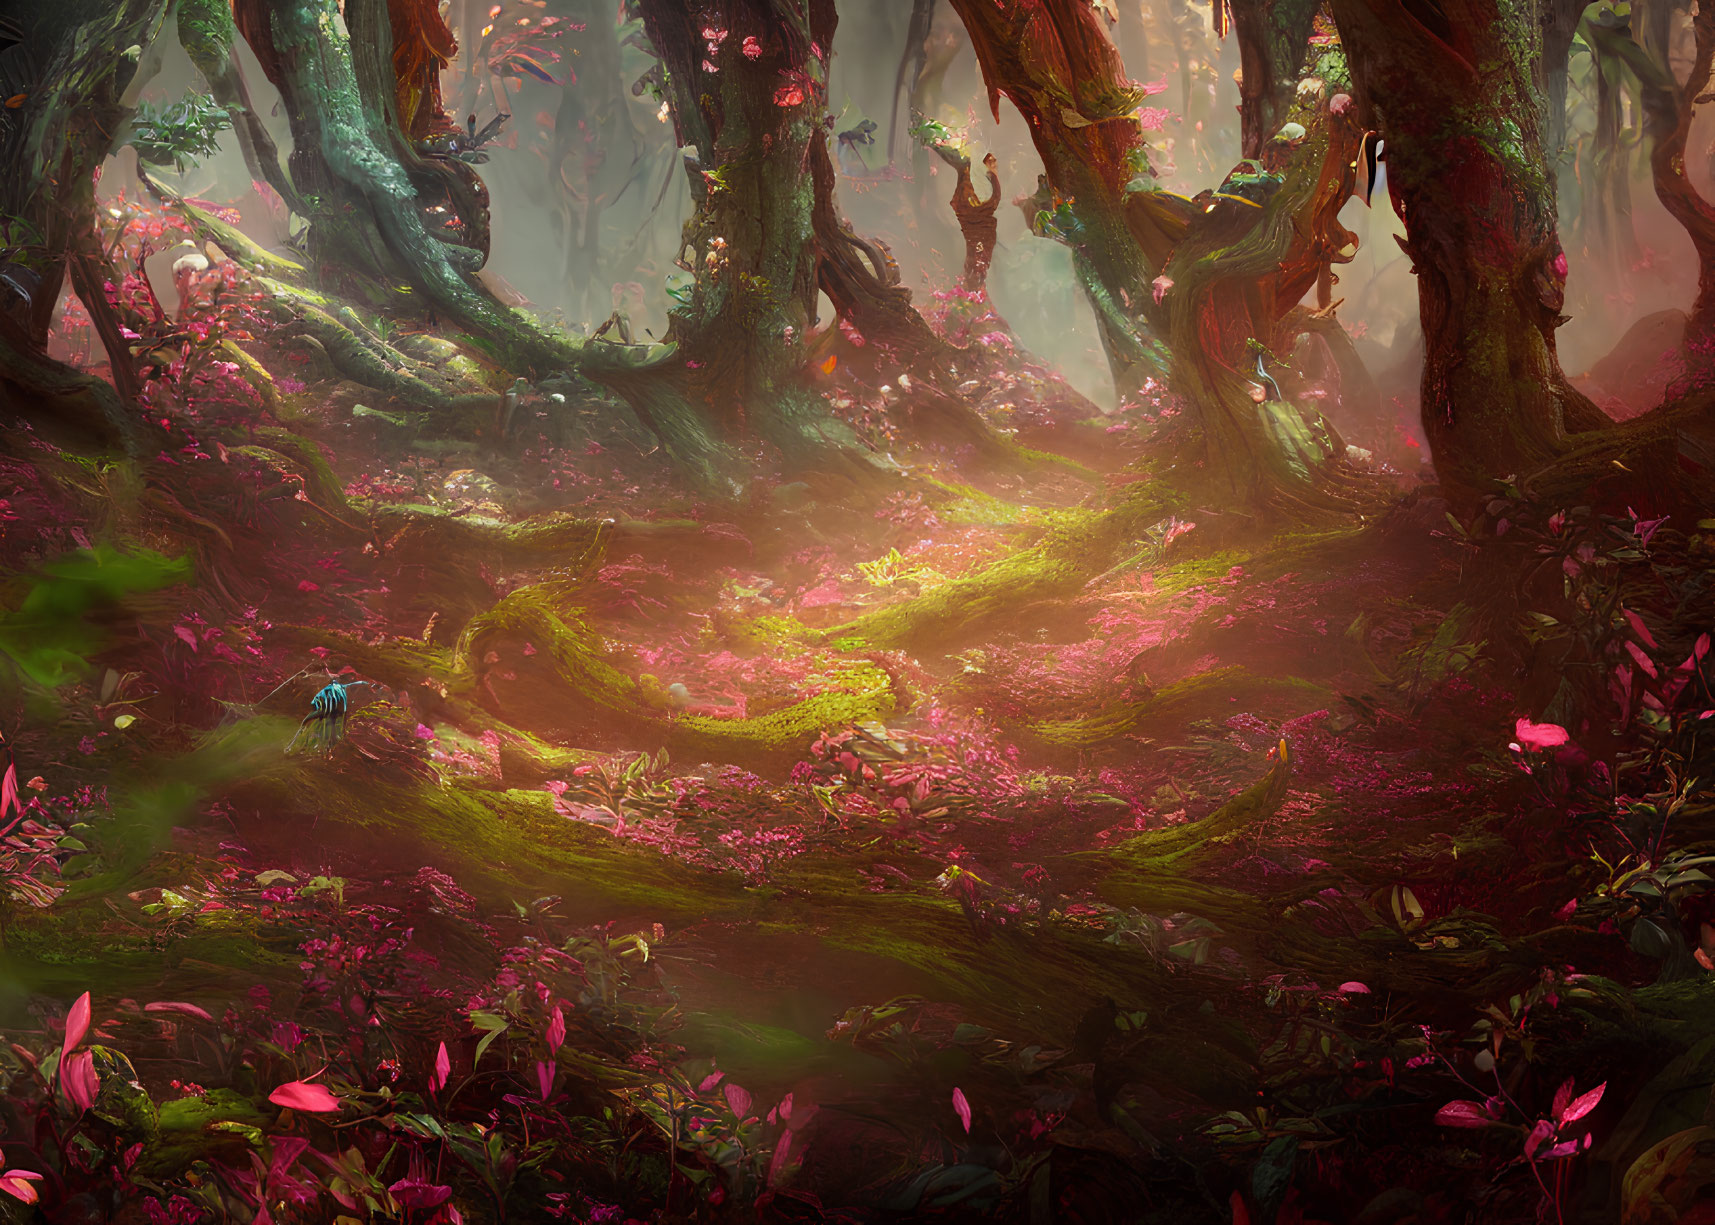 Vibrant pink and green mystical forest with twisting trees and glowing flora